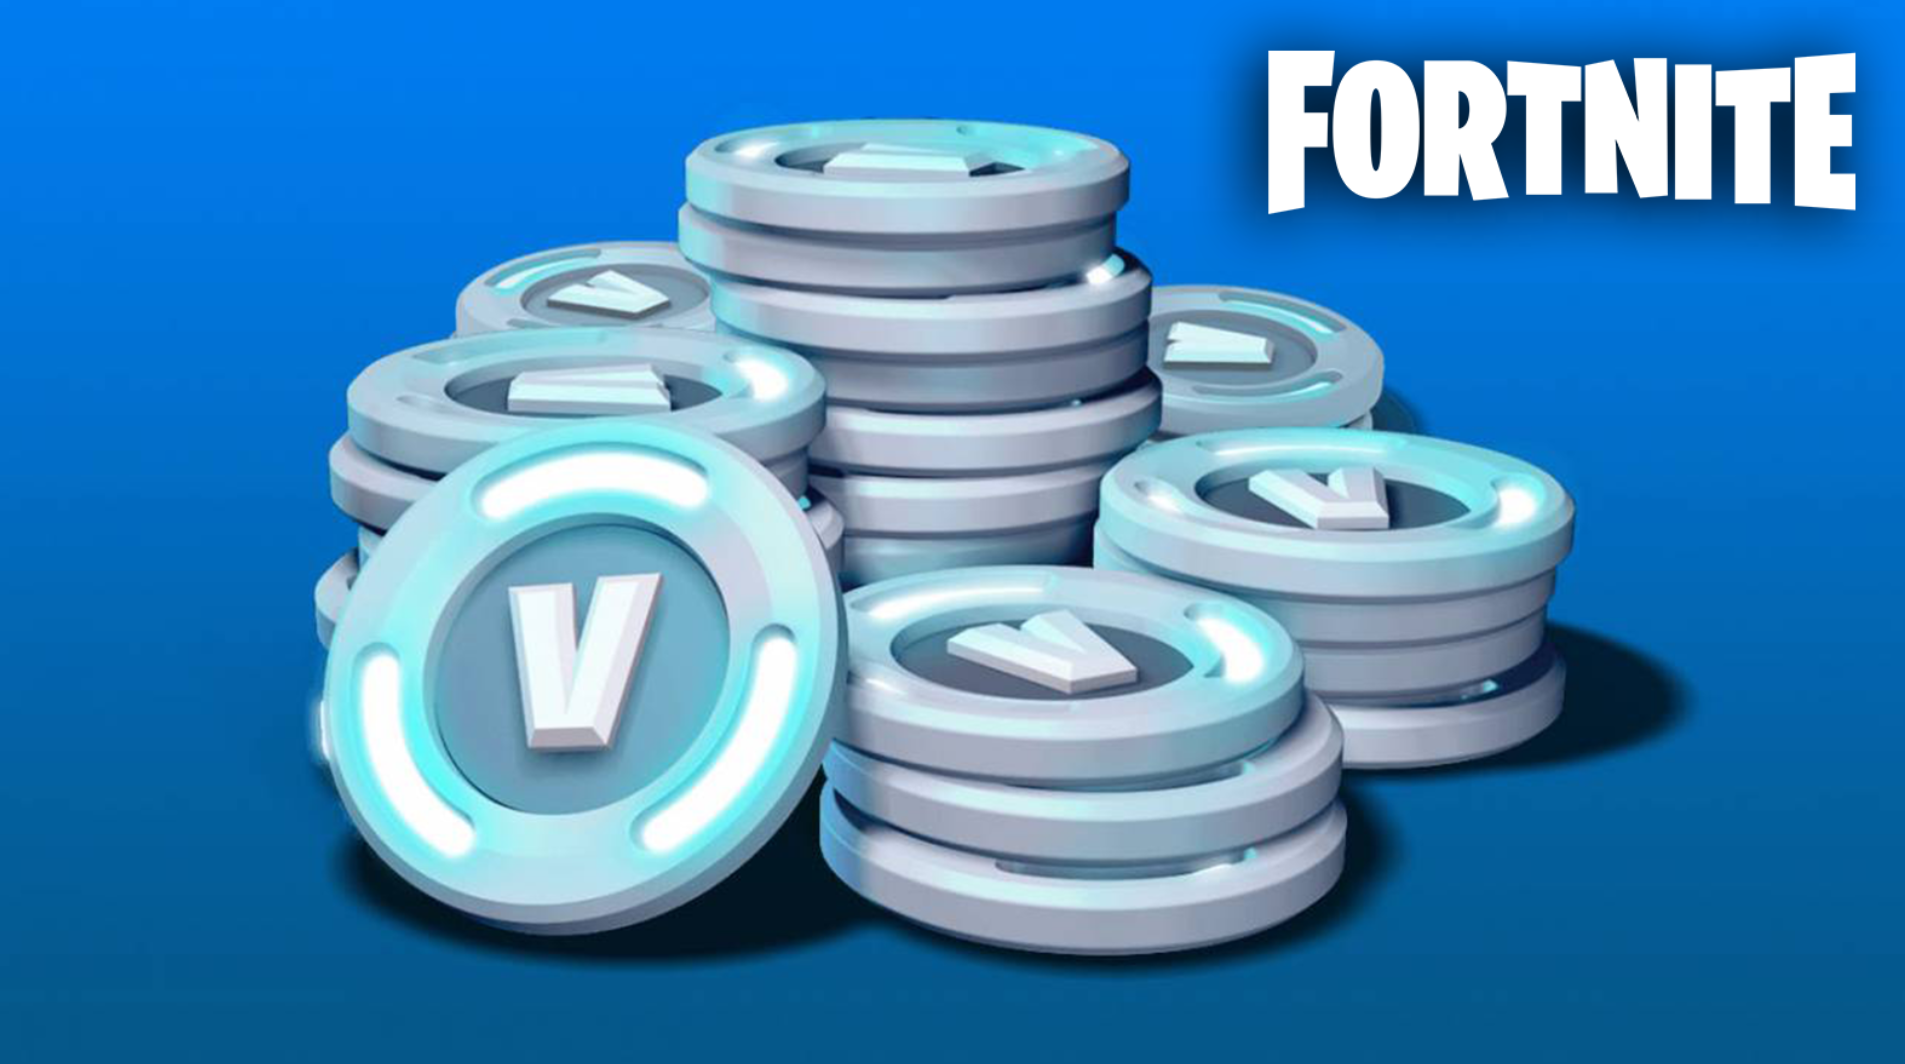 Epic Games giving out Fortnite V-Bucks in response to class-action lawsuit  - Dexerto